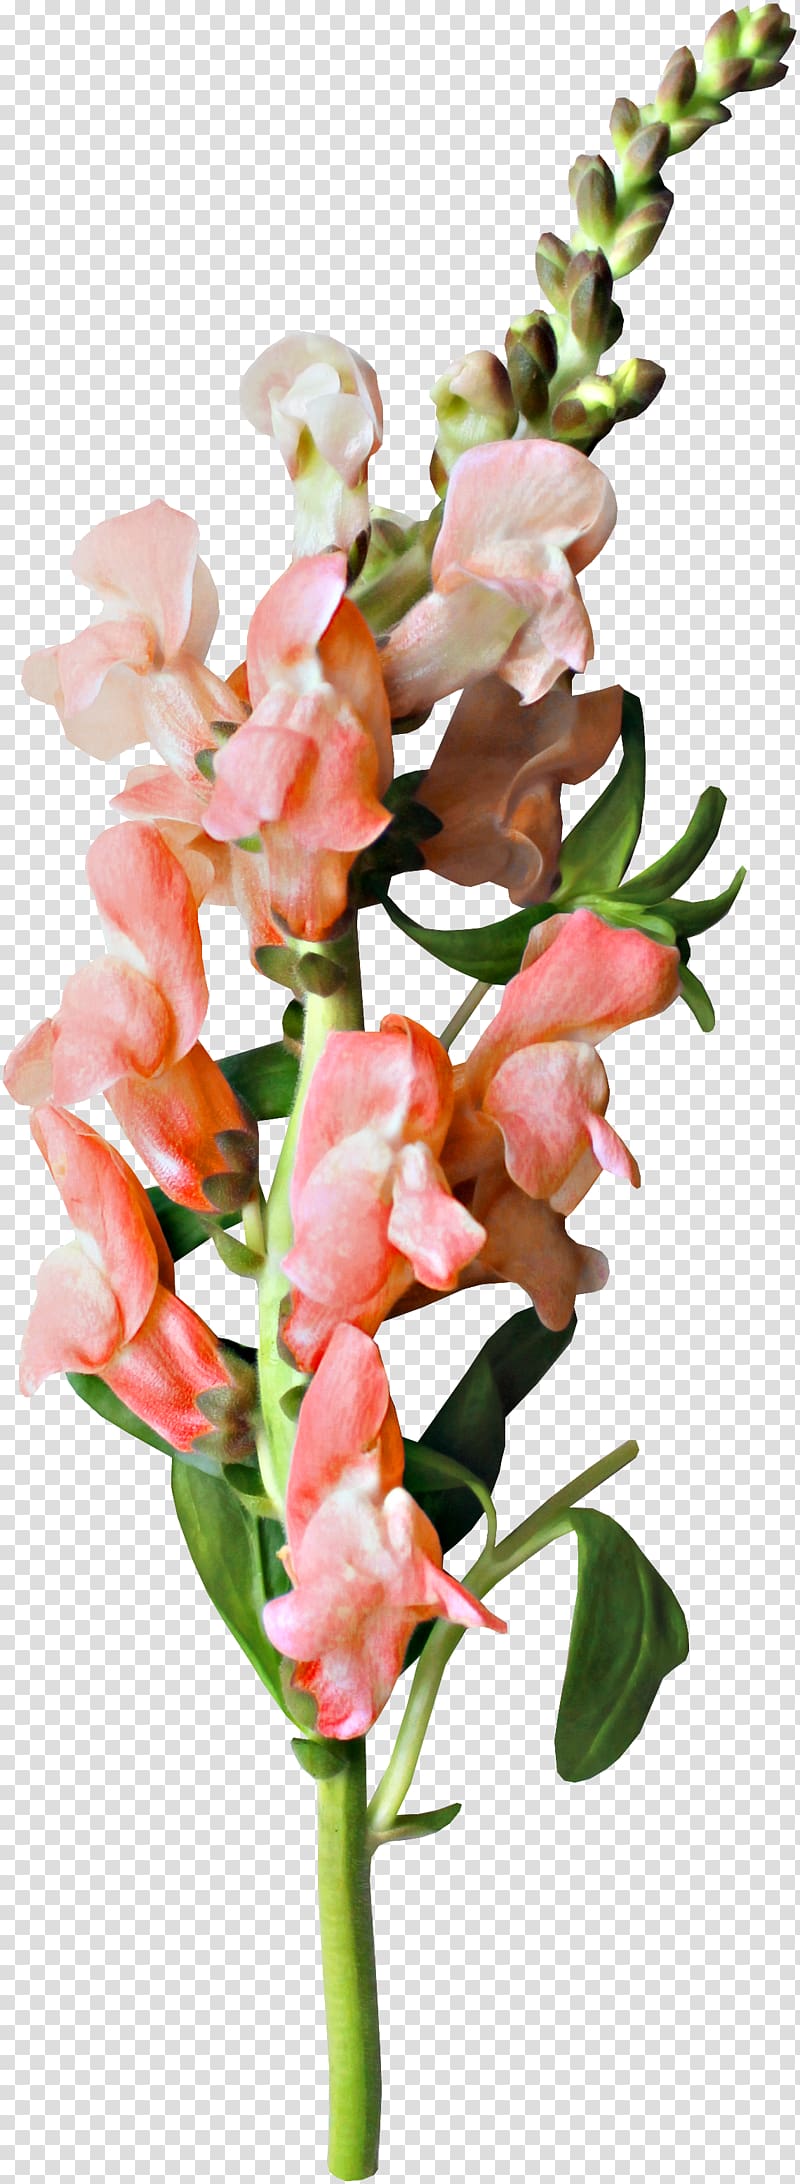 Flower , Beautiful bouquet of fresh flowers transparent background PNG clipart